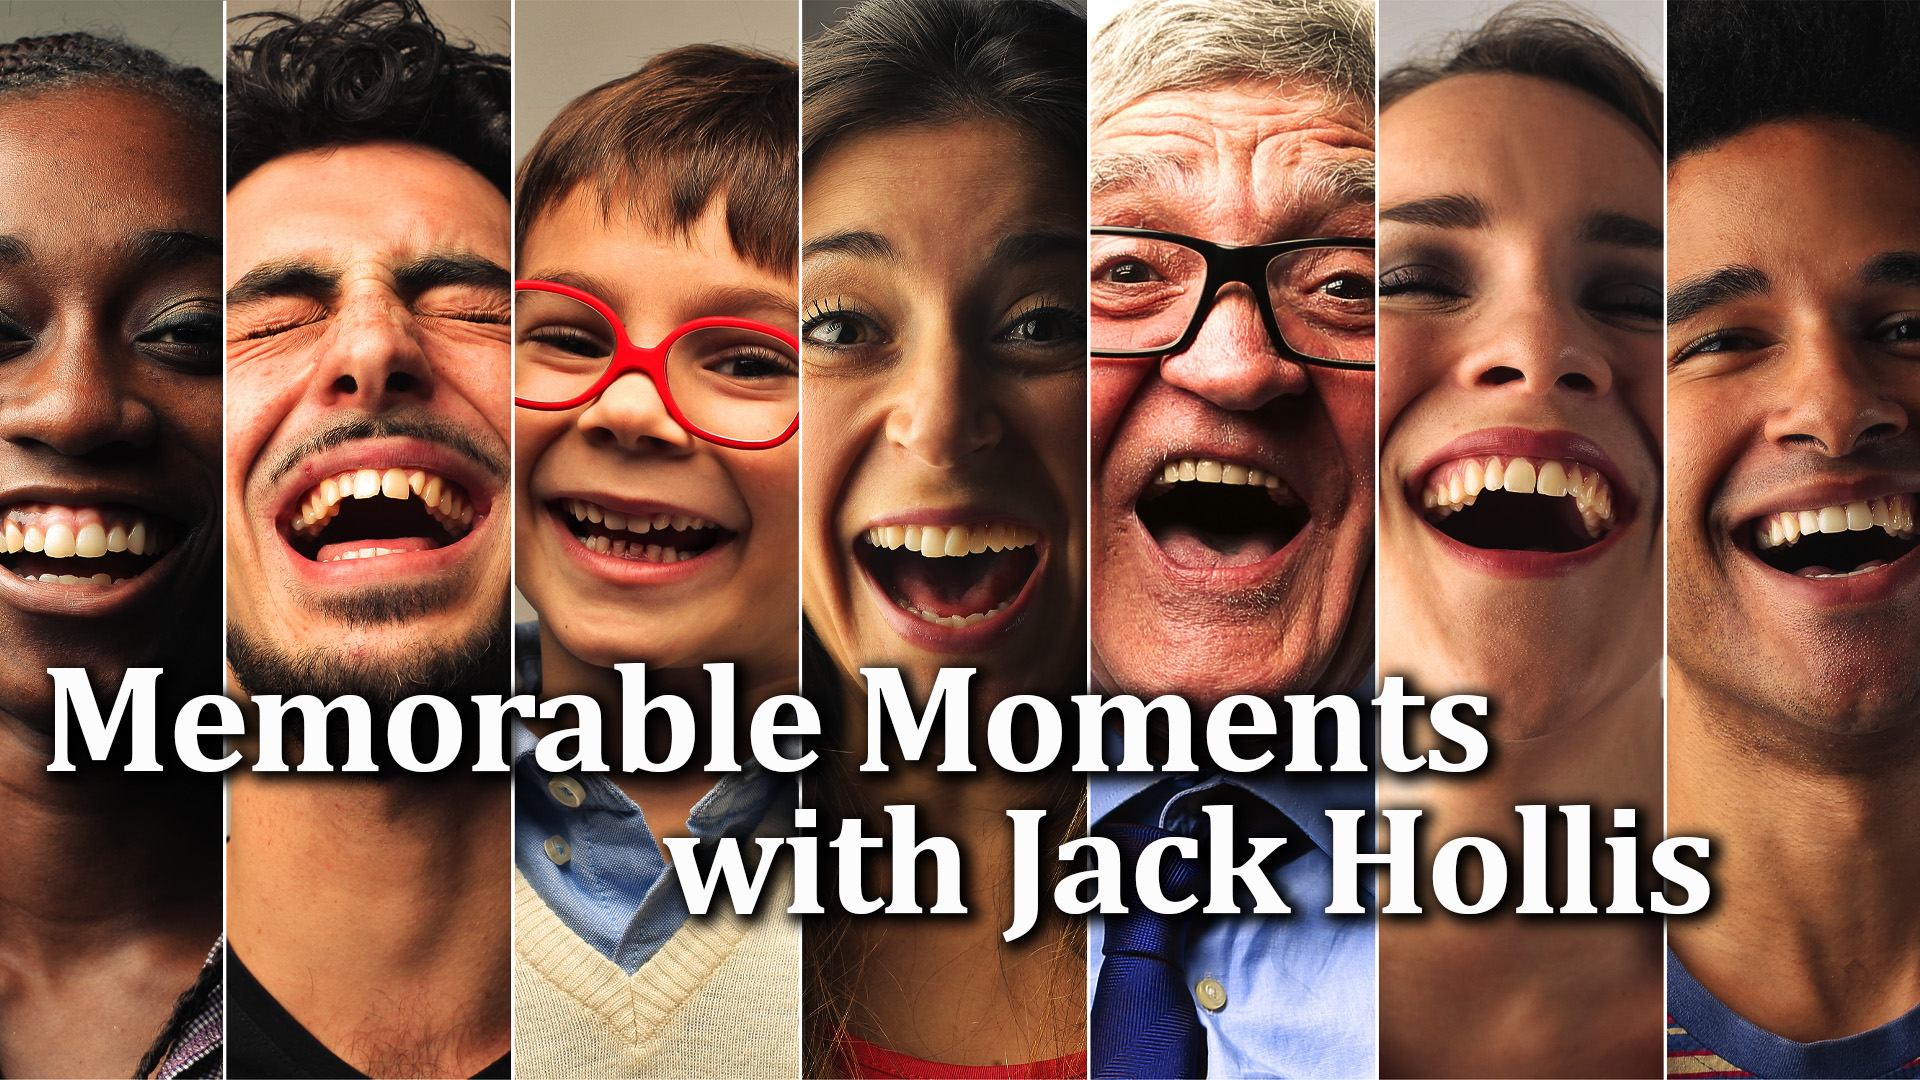 11-16-21 Memorable Moments with Jack Hollis